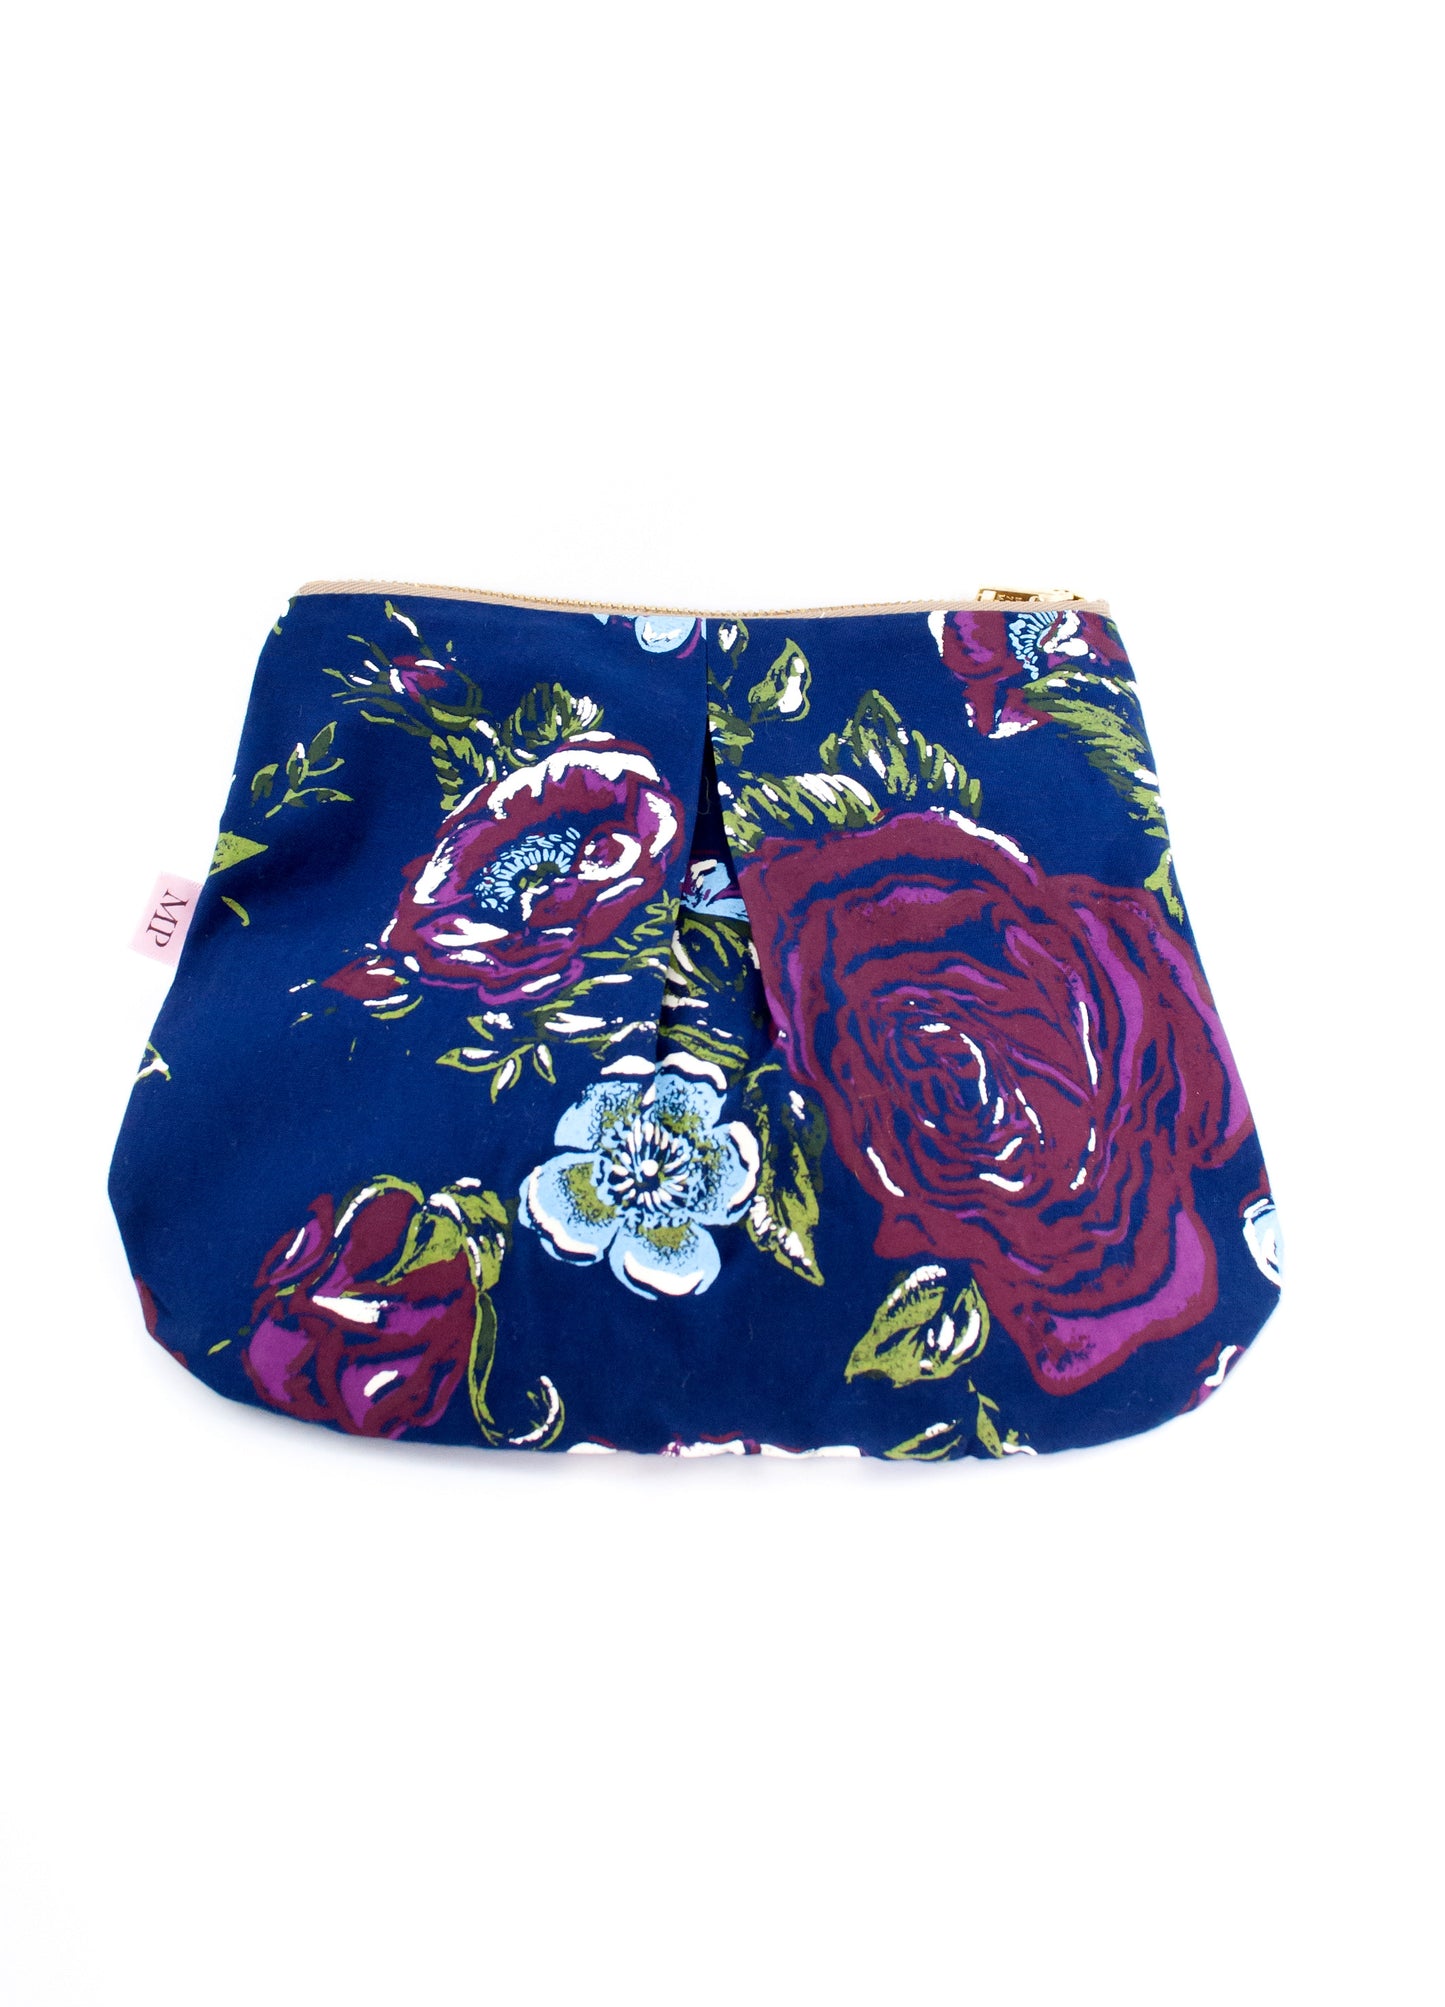 The Charlotte purse in navy Roses print